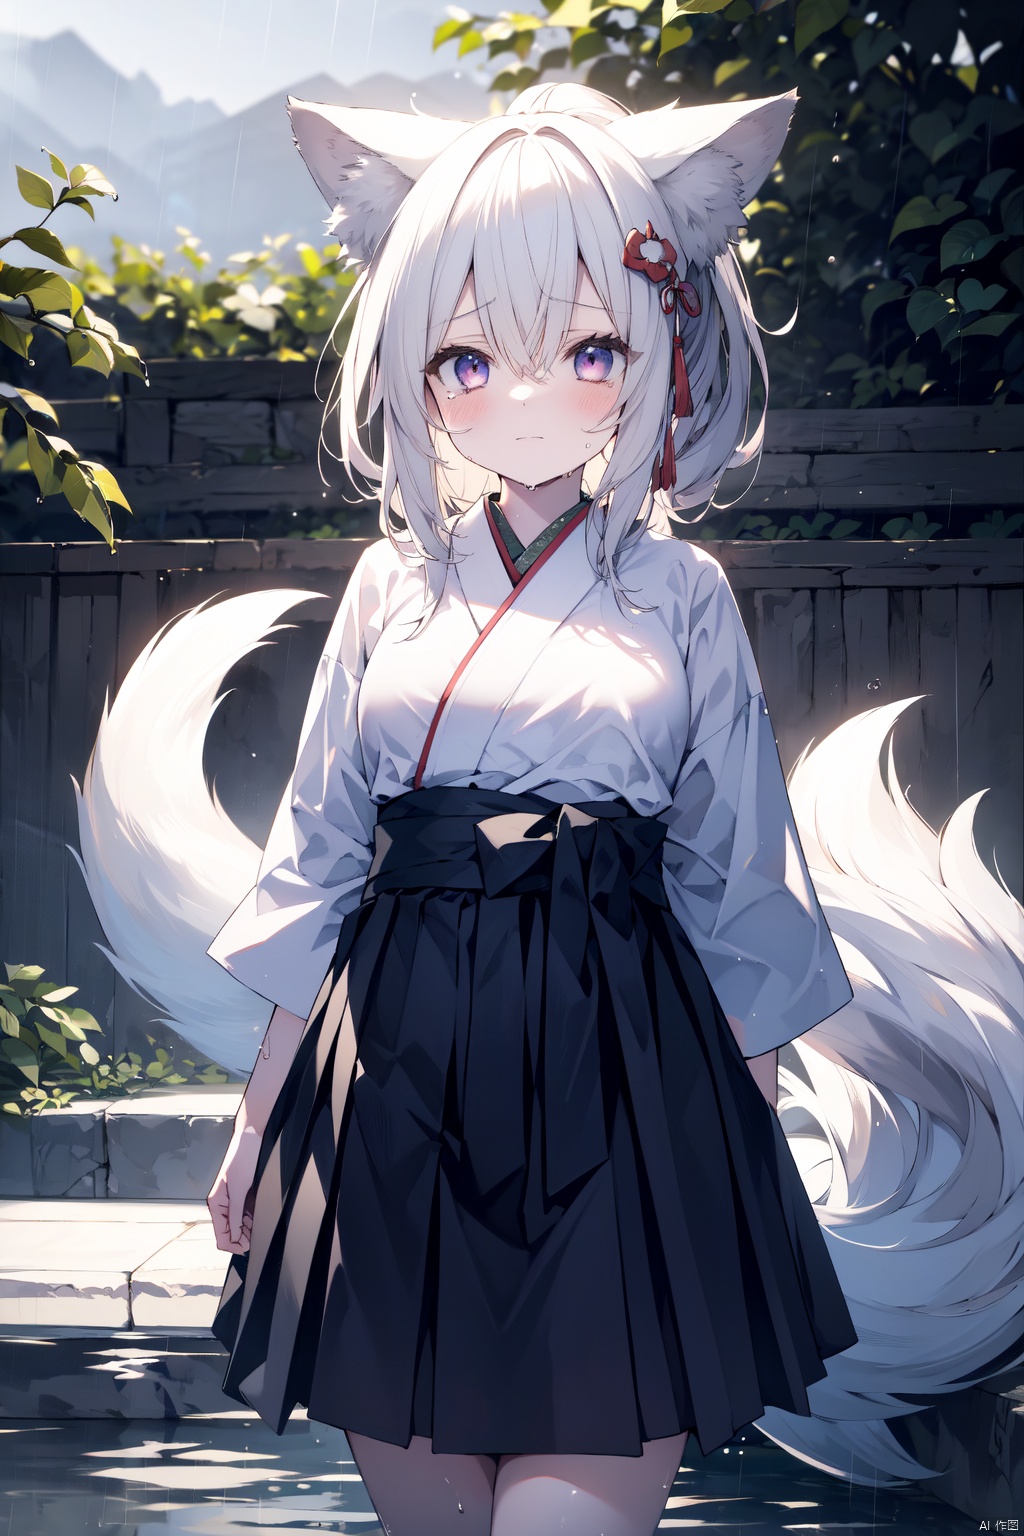  1girl, japanese_clothes, rain, fox_ears, solo, white_kimono, animal_ears, folded_ponytail, hakama, fox_tail, fox_girl, red_hakama, purple_eyes, tail, skirt, hakama_skirt, tears, kimono, hair_between_eyes, long_hair, crying, blush, bangs, outdoors, miko, animal_ear_fluff, crying_with_eyes_open, arms_behind_back, wet_clothes, long_sleeves, closed_mouth, white_hair, wet, looking_at_viewer, standing, hair_ornament, hair_ribbon, very_long_hair, Girl